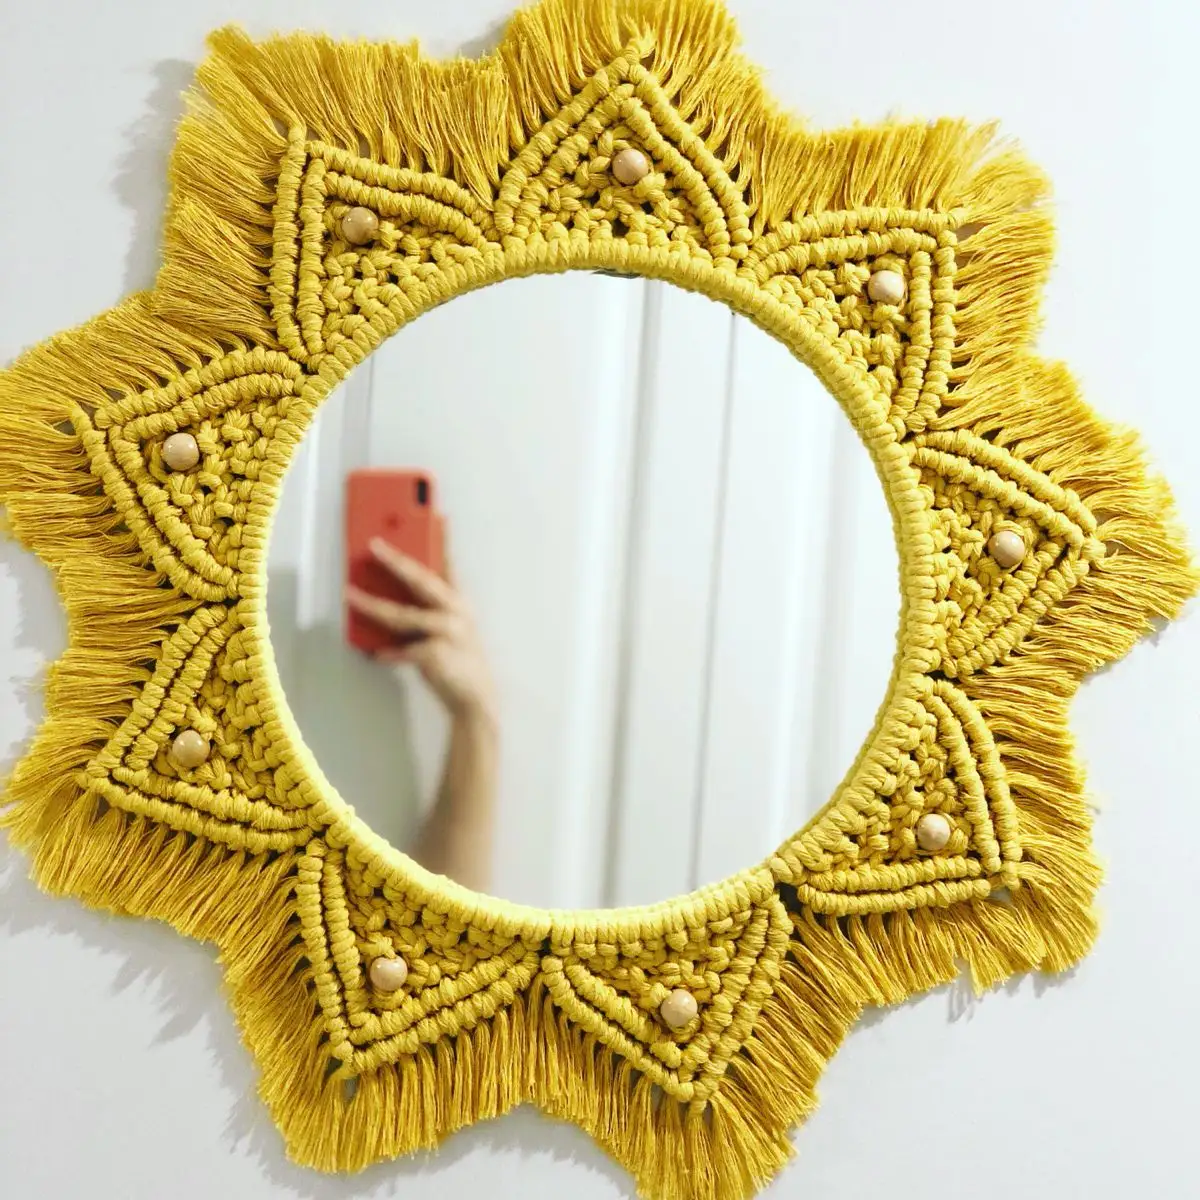 Mustard Color Graceful Macrame Hand Made Cotton Woven Mandala Tapestry Mirror Boho Wall Hanging Mirror For Home